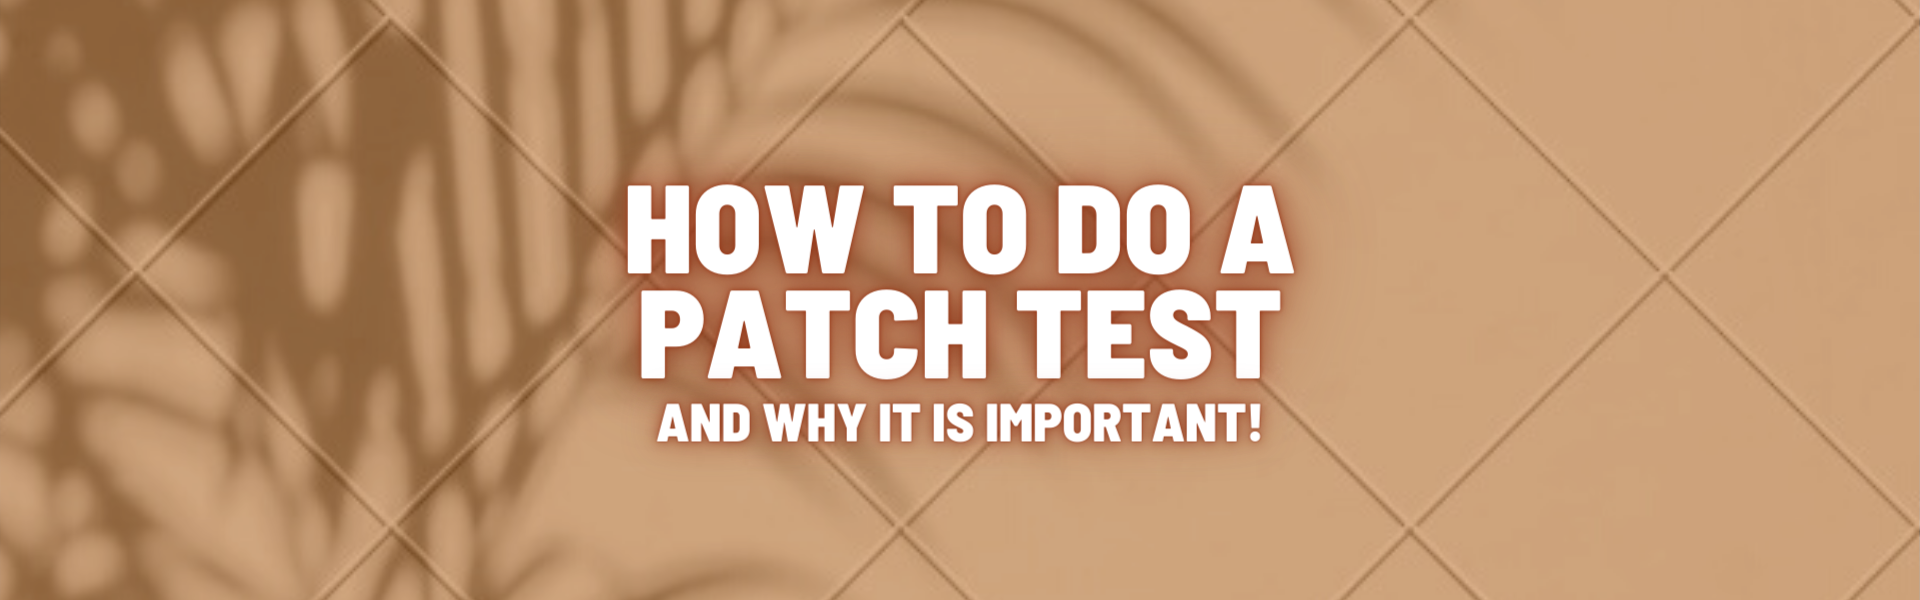 How to do a Patch Test (and why it is important!)